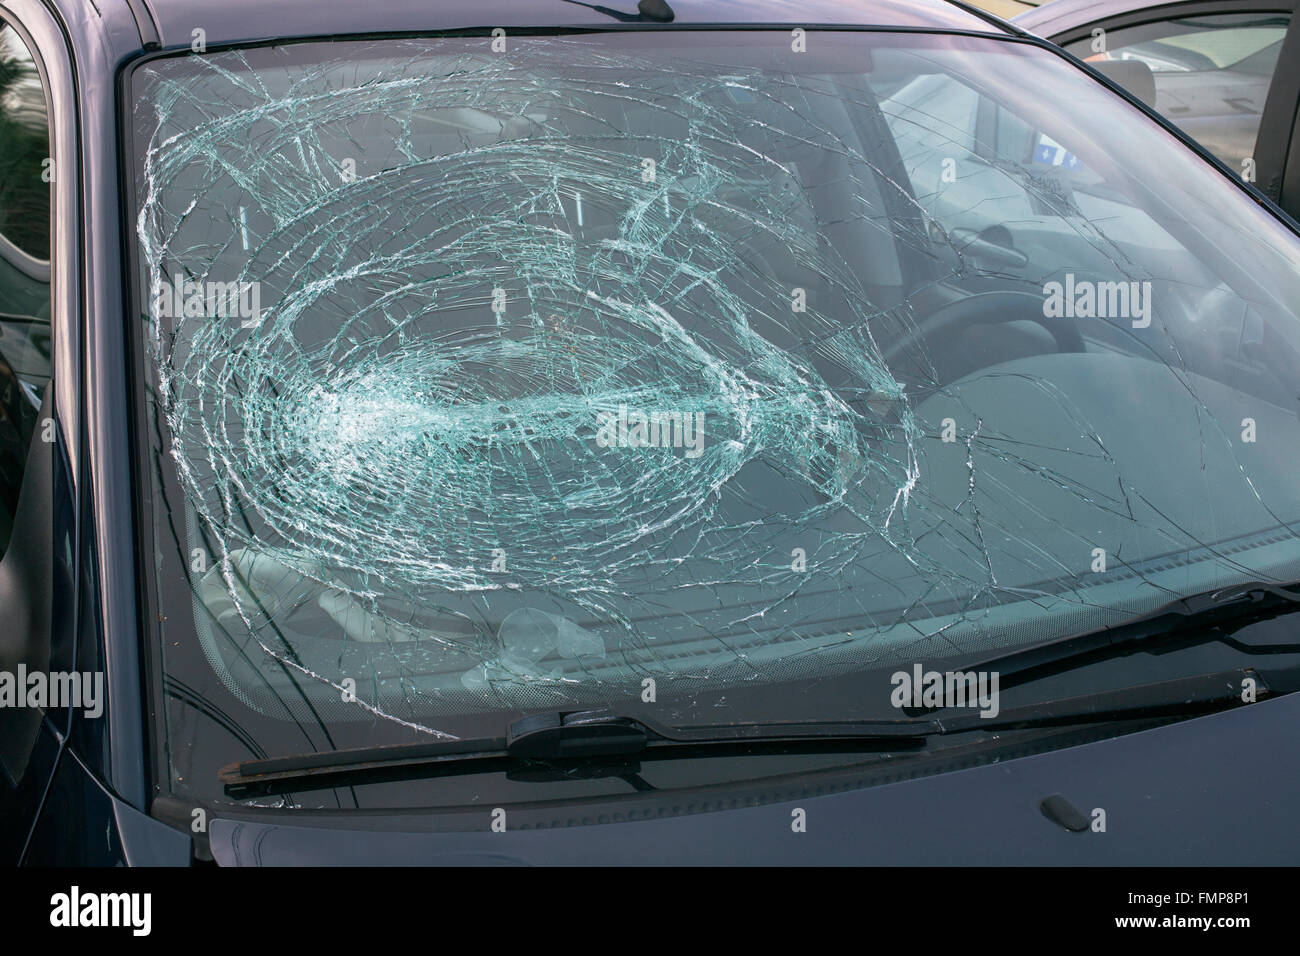 Smashed windshield of a car, Canada Stock Photo